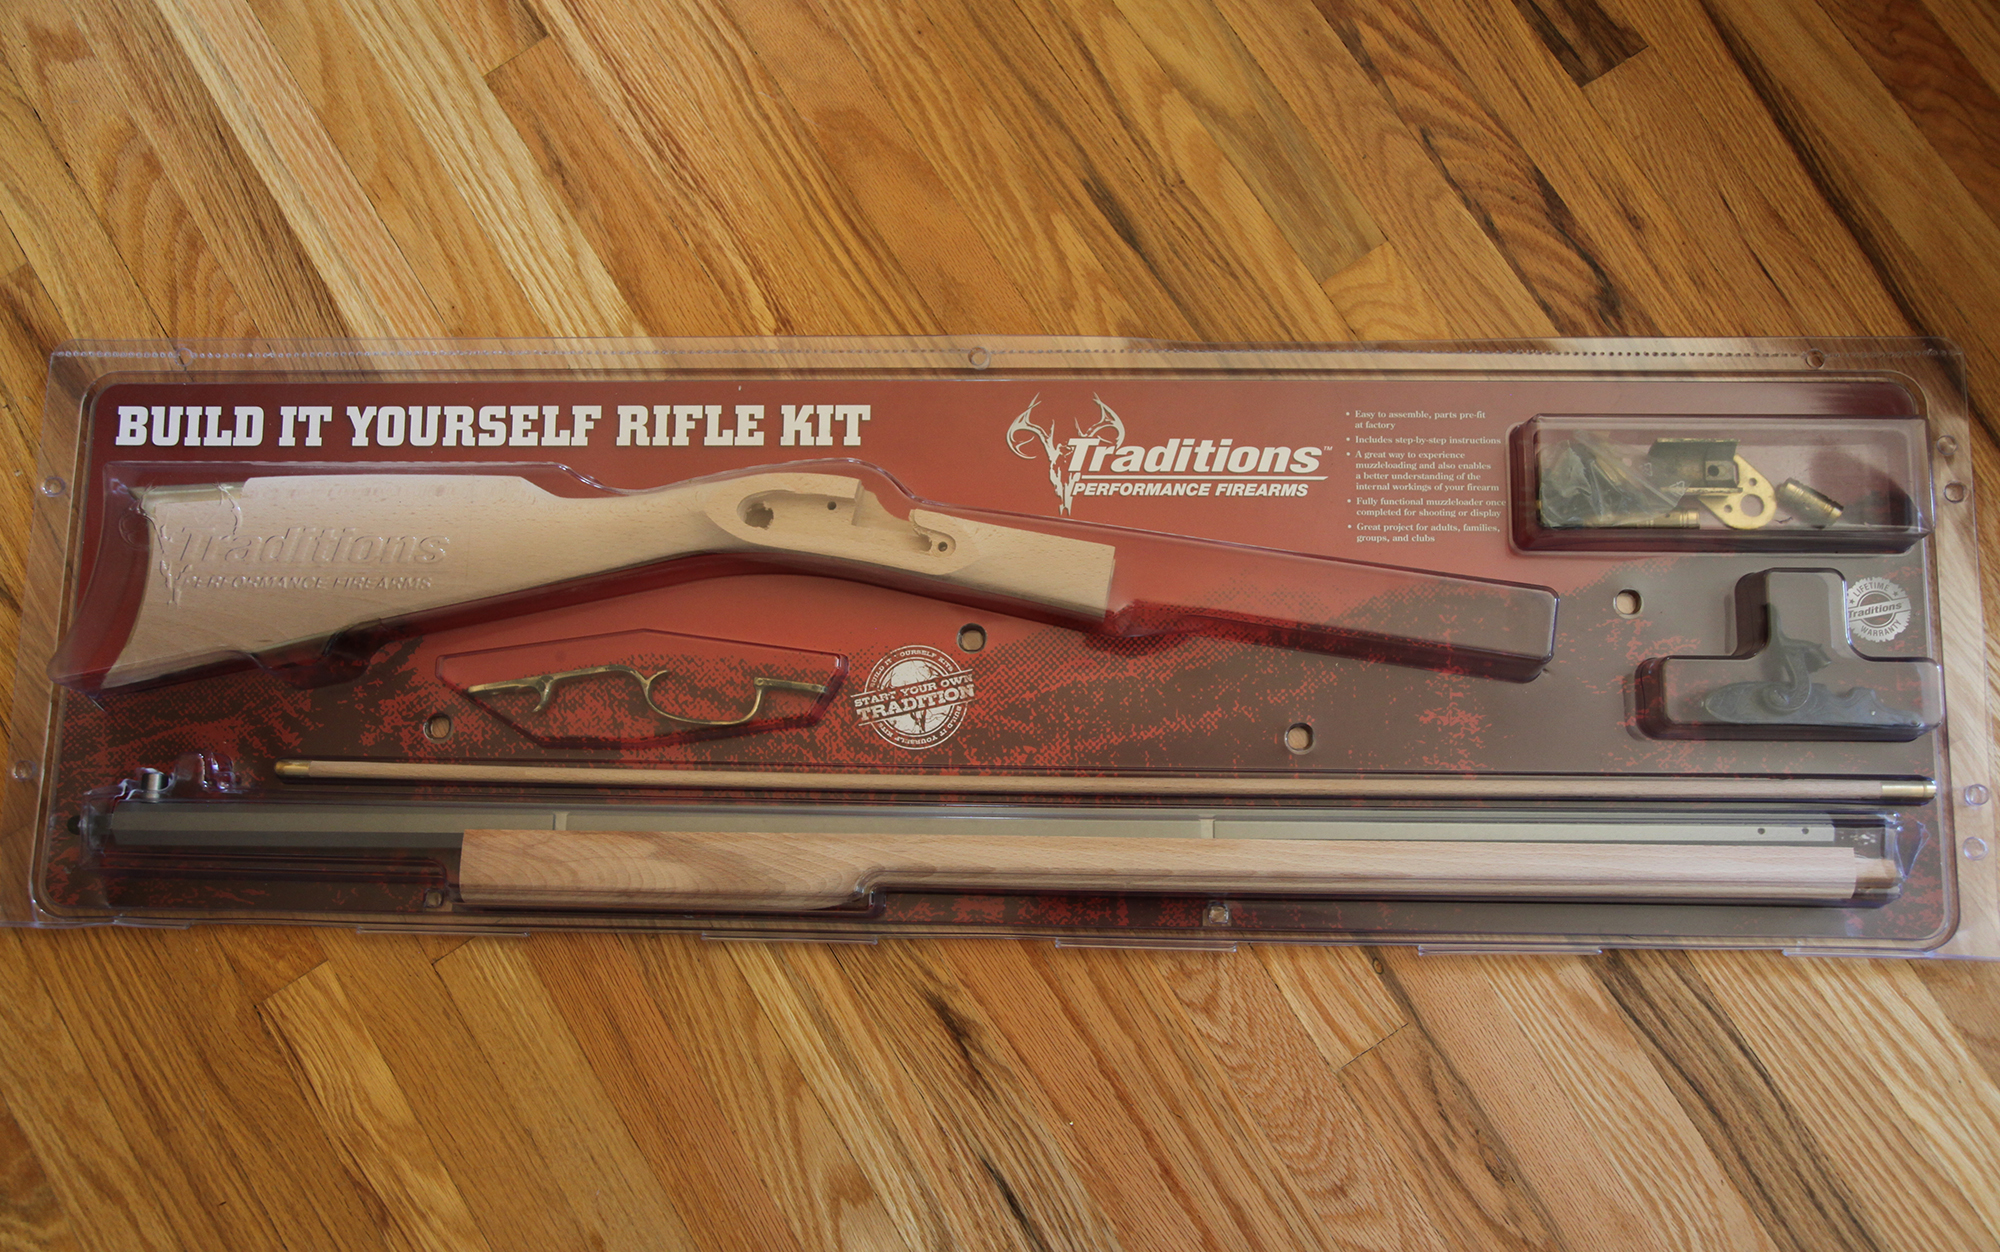 Traditions makes a "buil-your-own-rifle" kit.